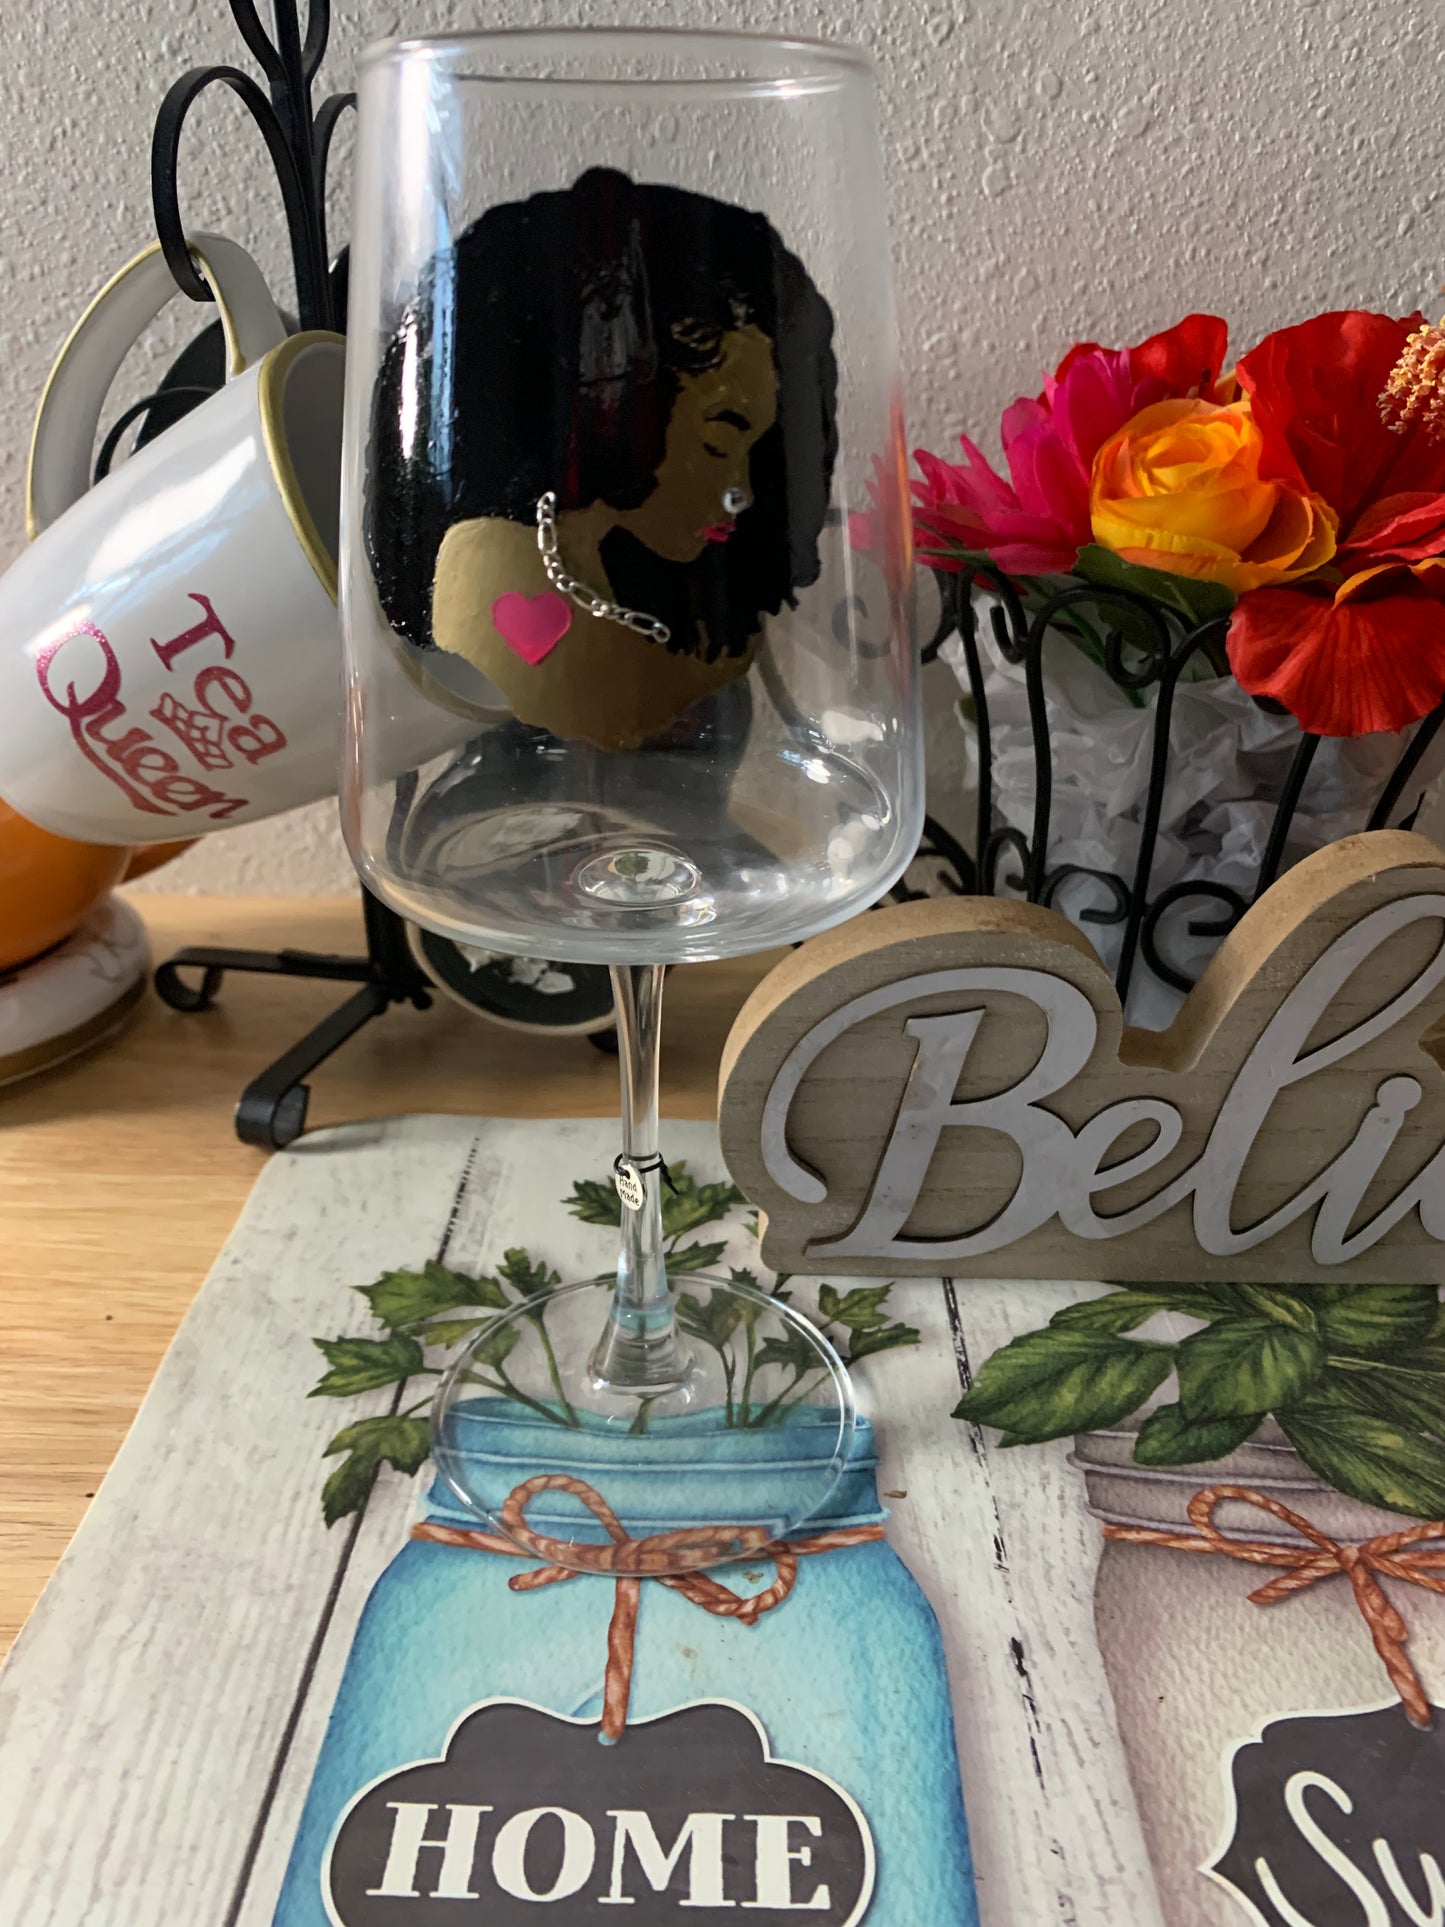 Perfectly imperfect wine glass with personalized letter